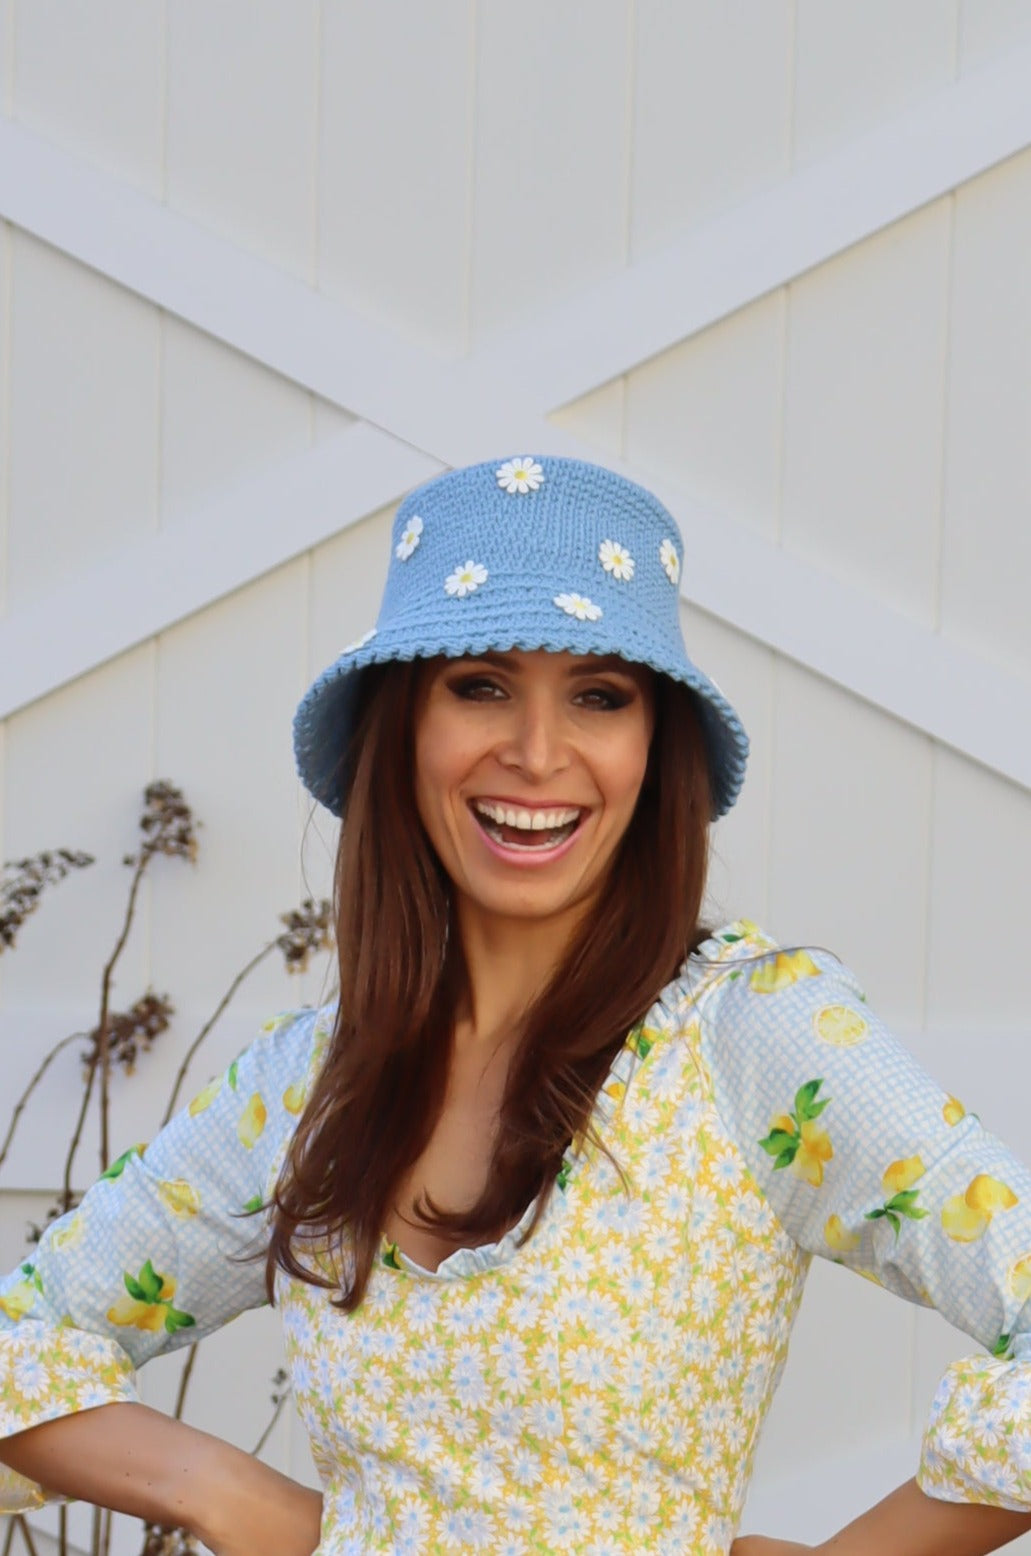 Model smiling with hands on hips wearing Hand Crocheted Bucket Hat with Daisies.